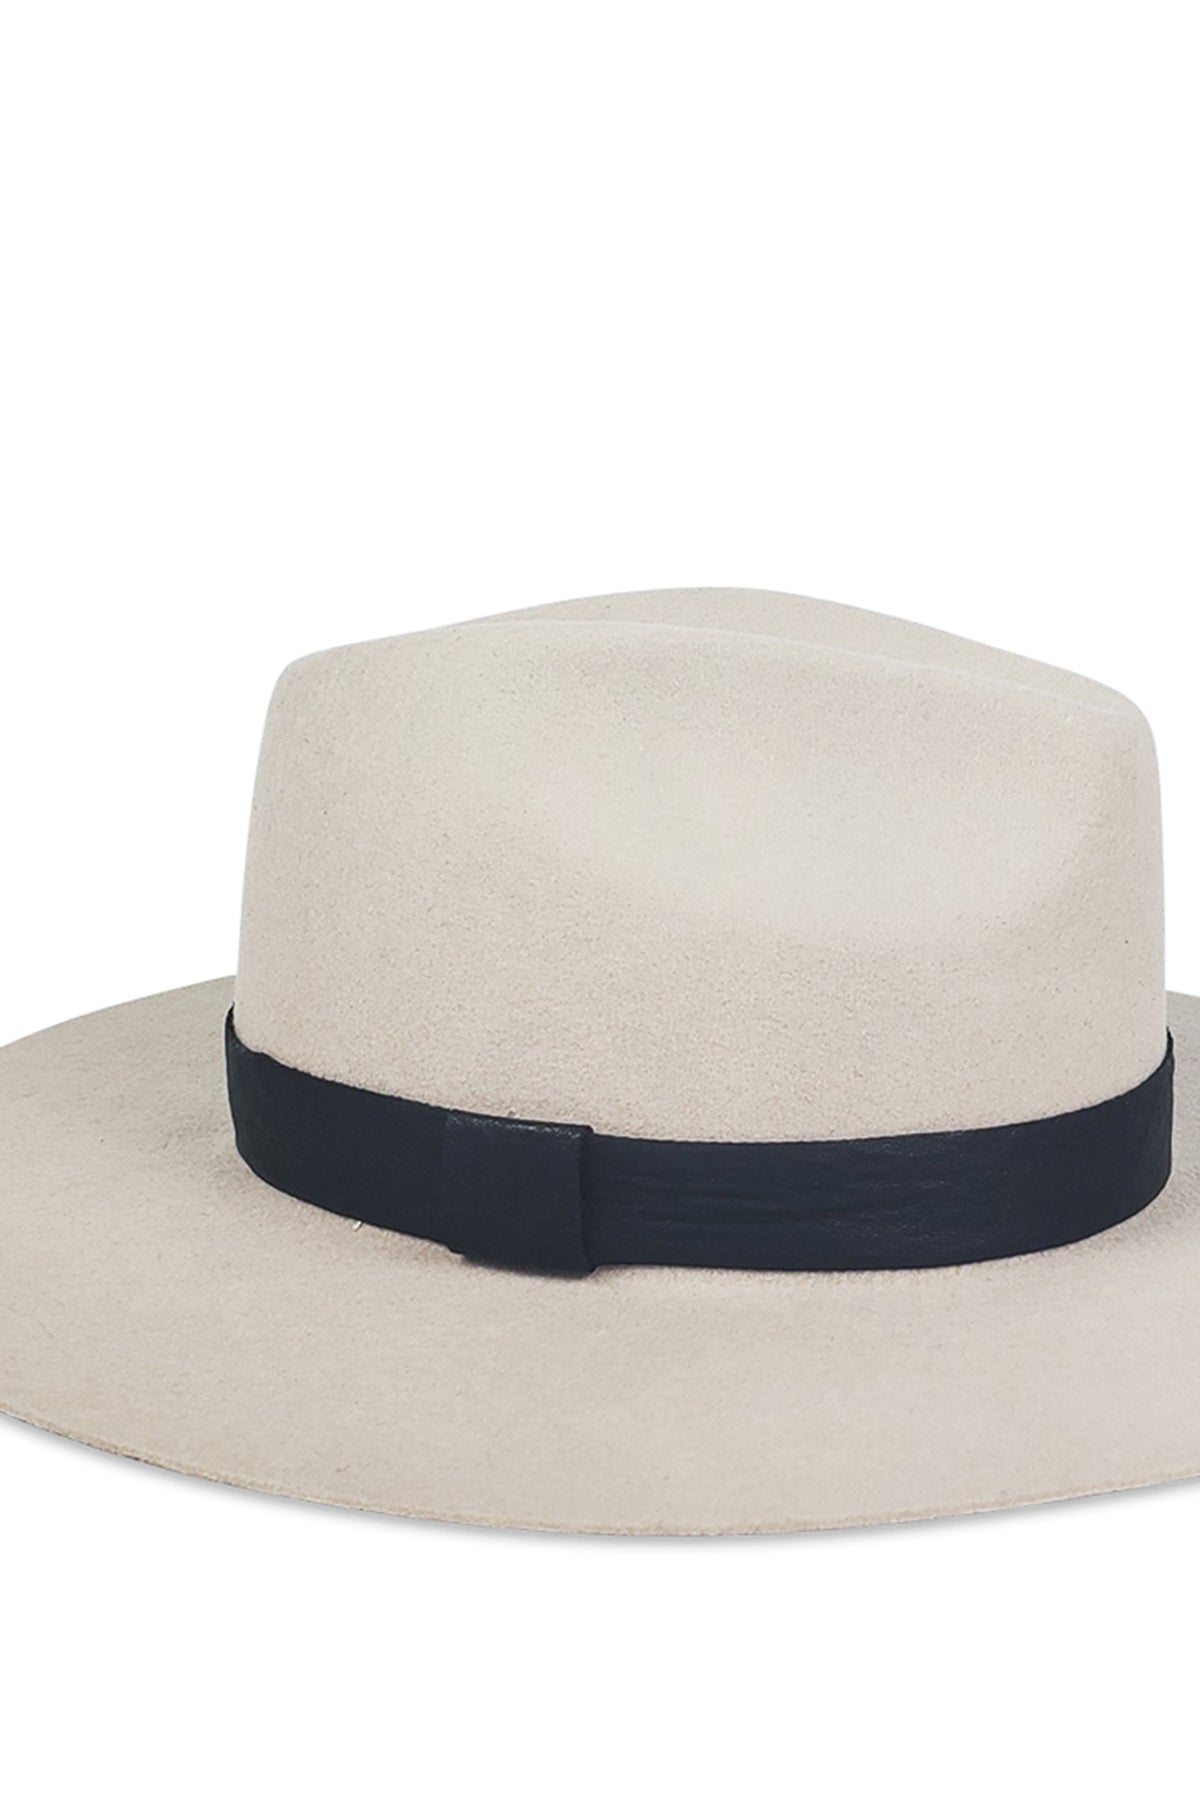   A timeless LUXE AVA FEDORA hat with a black band by Velvet by Graham & Spencer. 